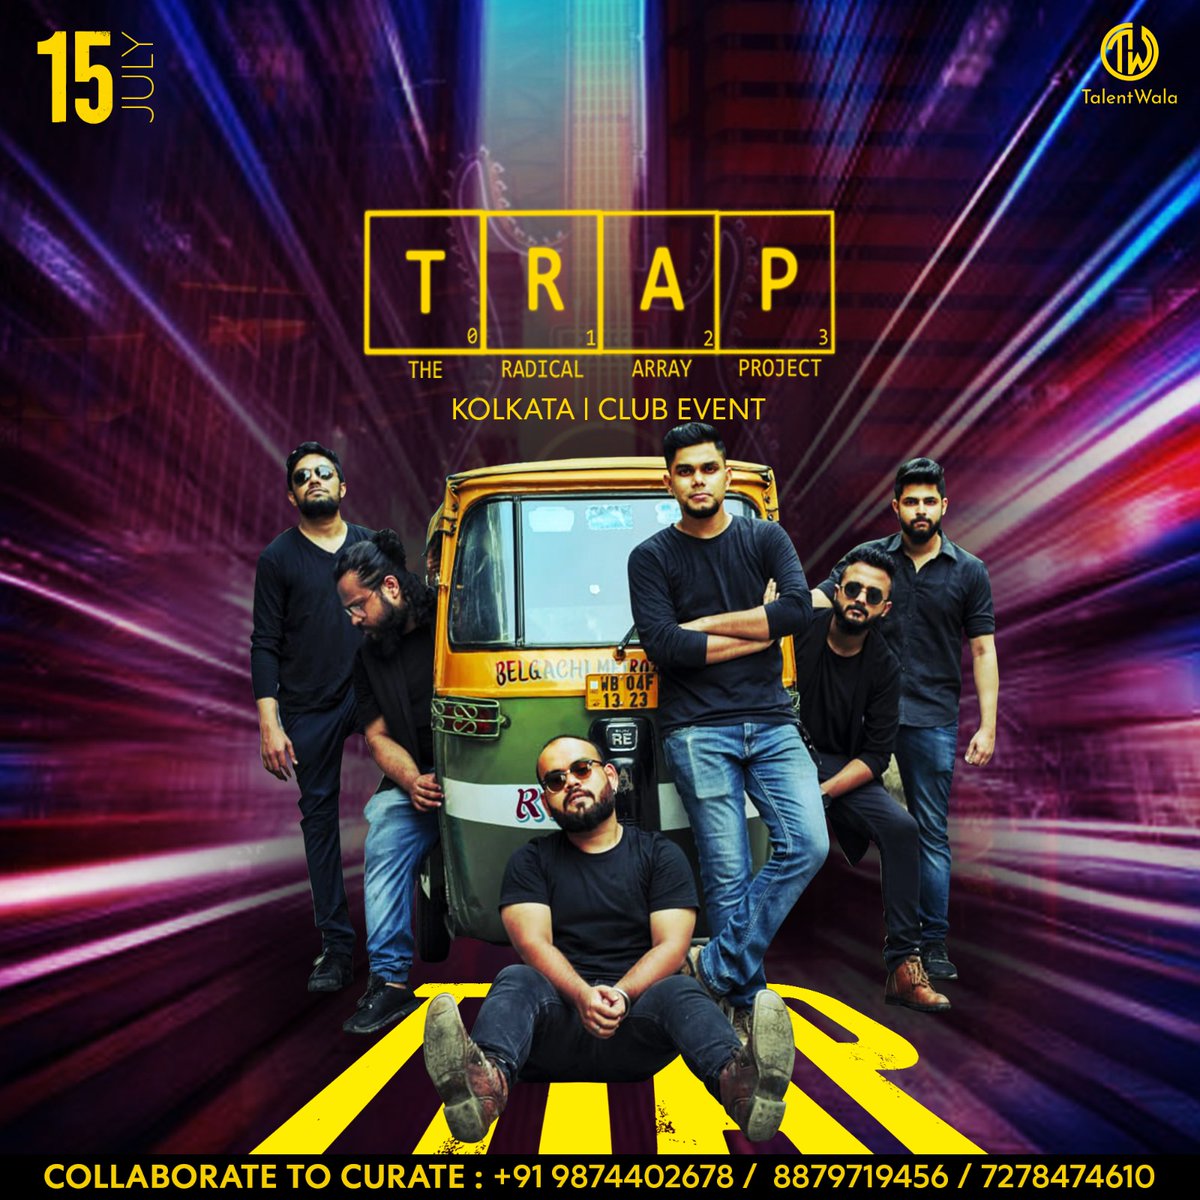 ‼️Alert! You might get trapped this Saturday! 
.
As The Radical Array Project (TRAP) gears up for a dynamic performance at 🎸Hard Rock Cafe.
.
❓Are you coming?
.
#trap #theradicalarrayproject #hardrockcafè #hardrockcafekolkata #rockband #bandmusic 
#eventmanagement #kolkataevent